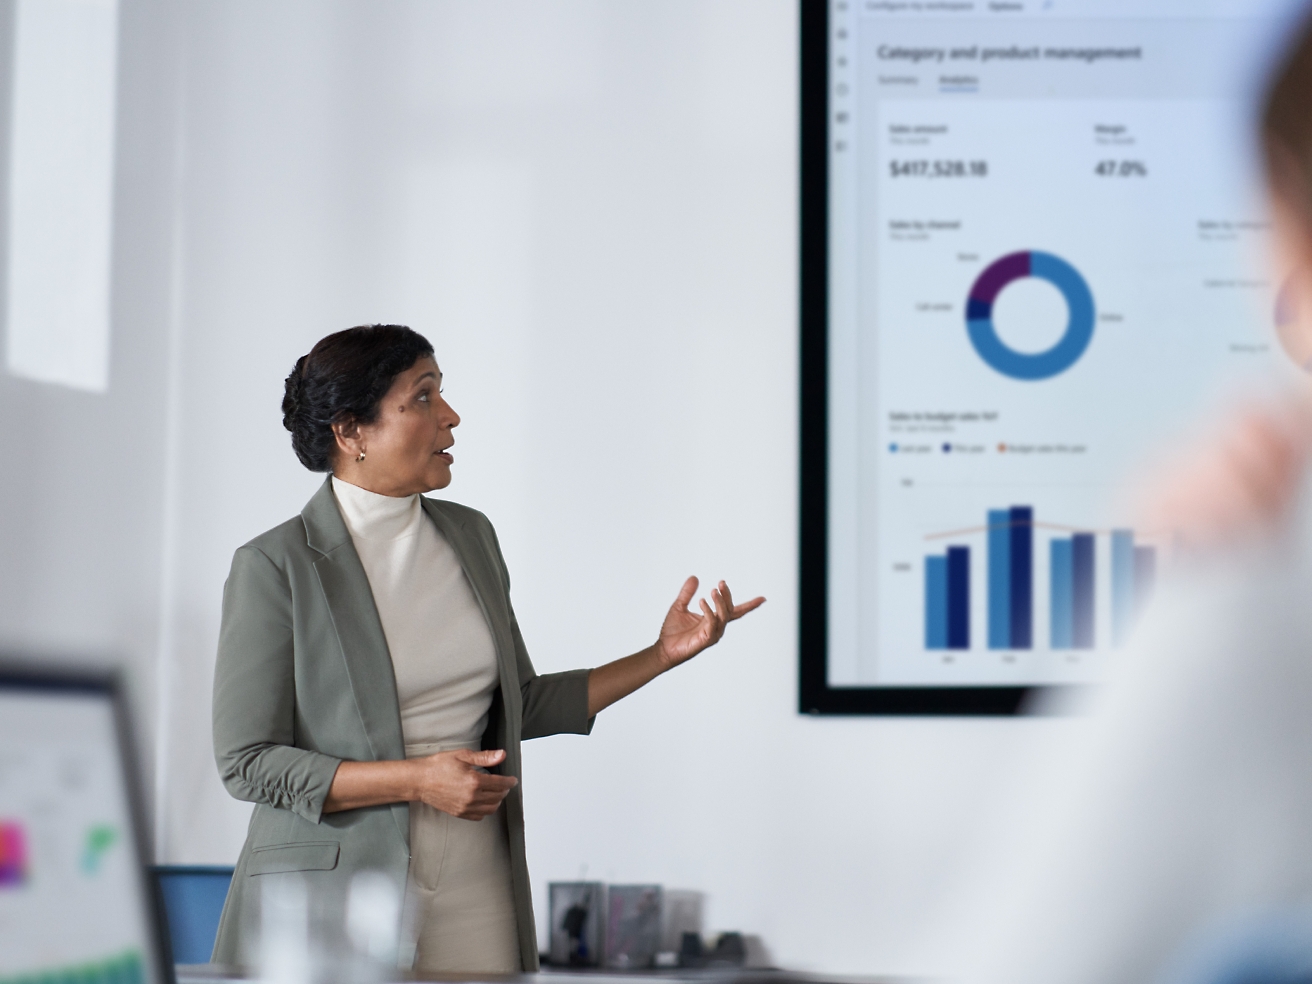 A professional woman presents financial data on a screen to her audience in a modern office setting.